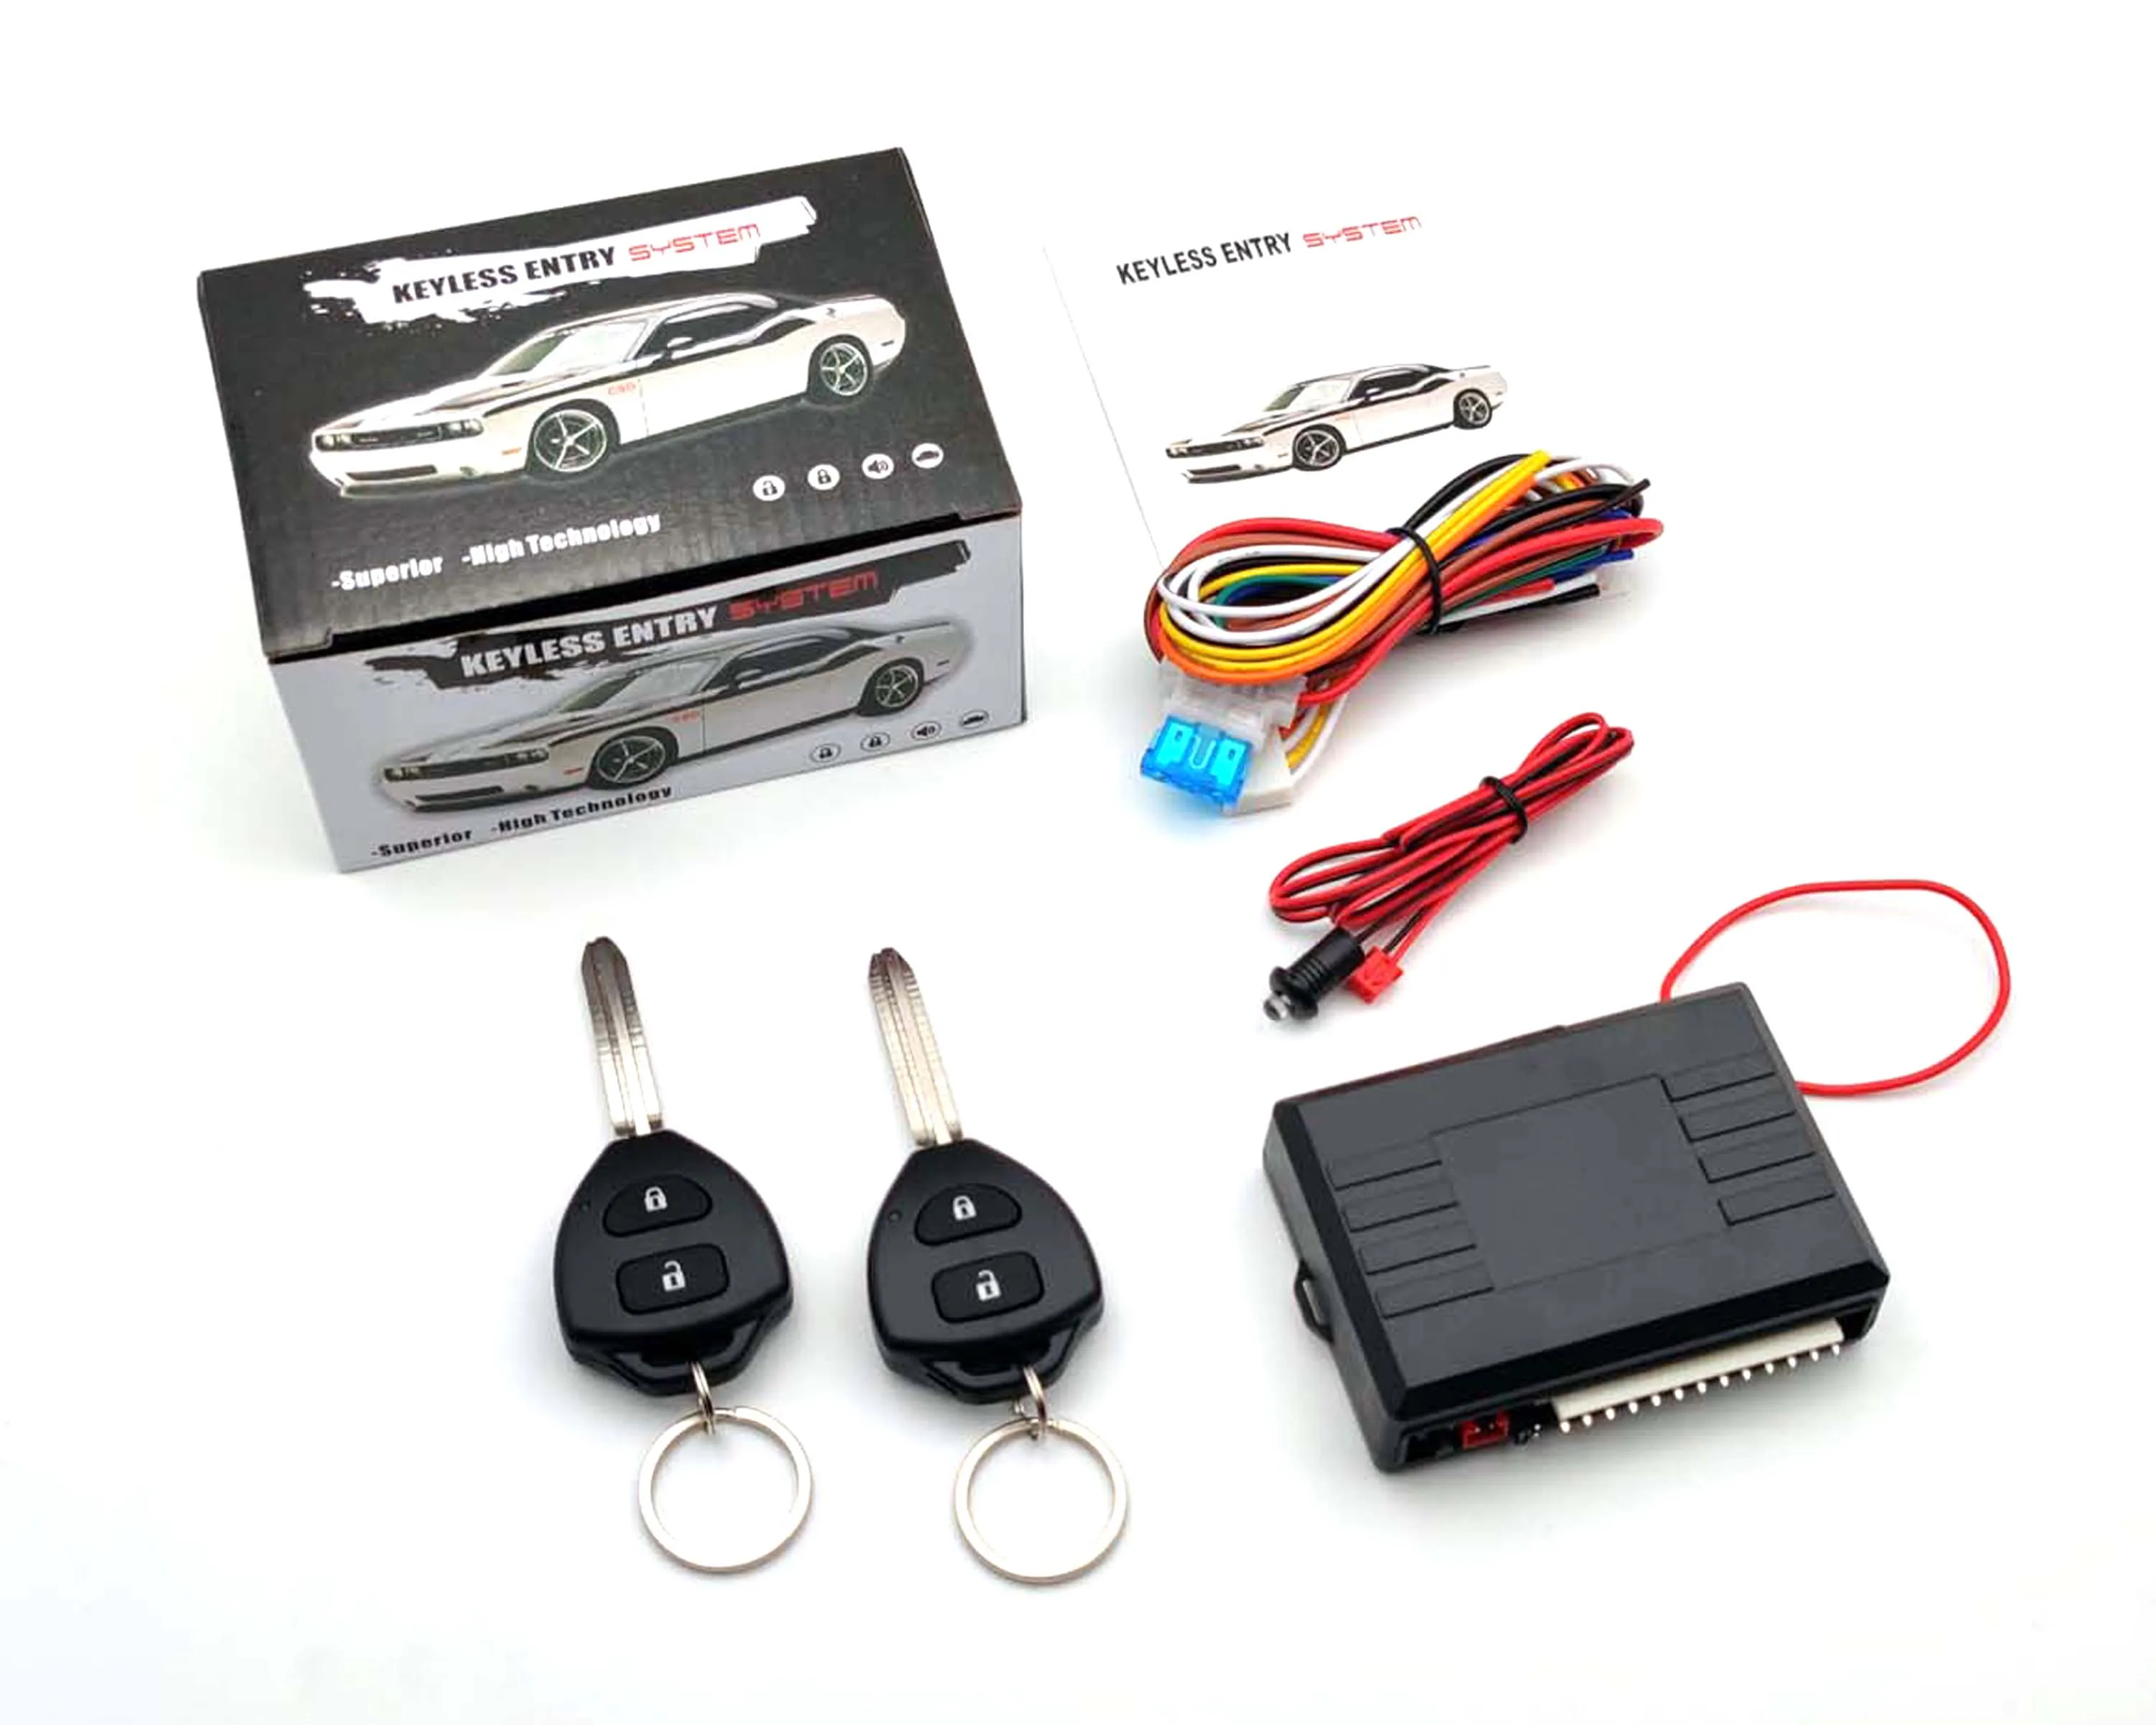 

Car Remote Central Kit Button Start Stop Door Lock Locking Vehicle Keyless Entry System Easy to Install